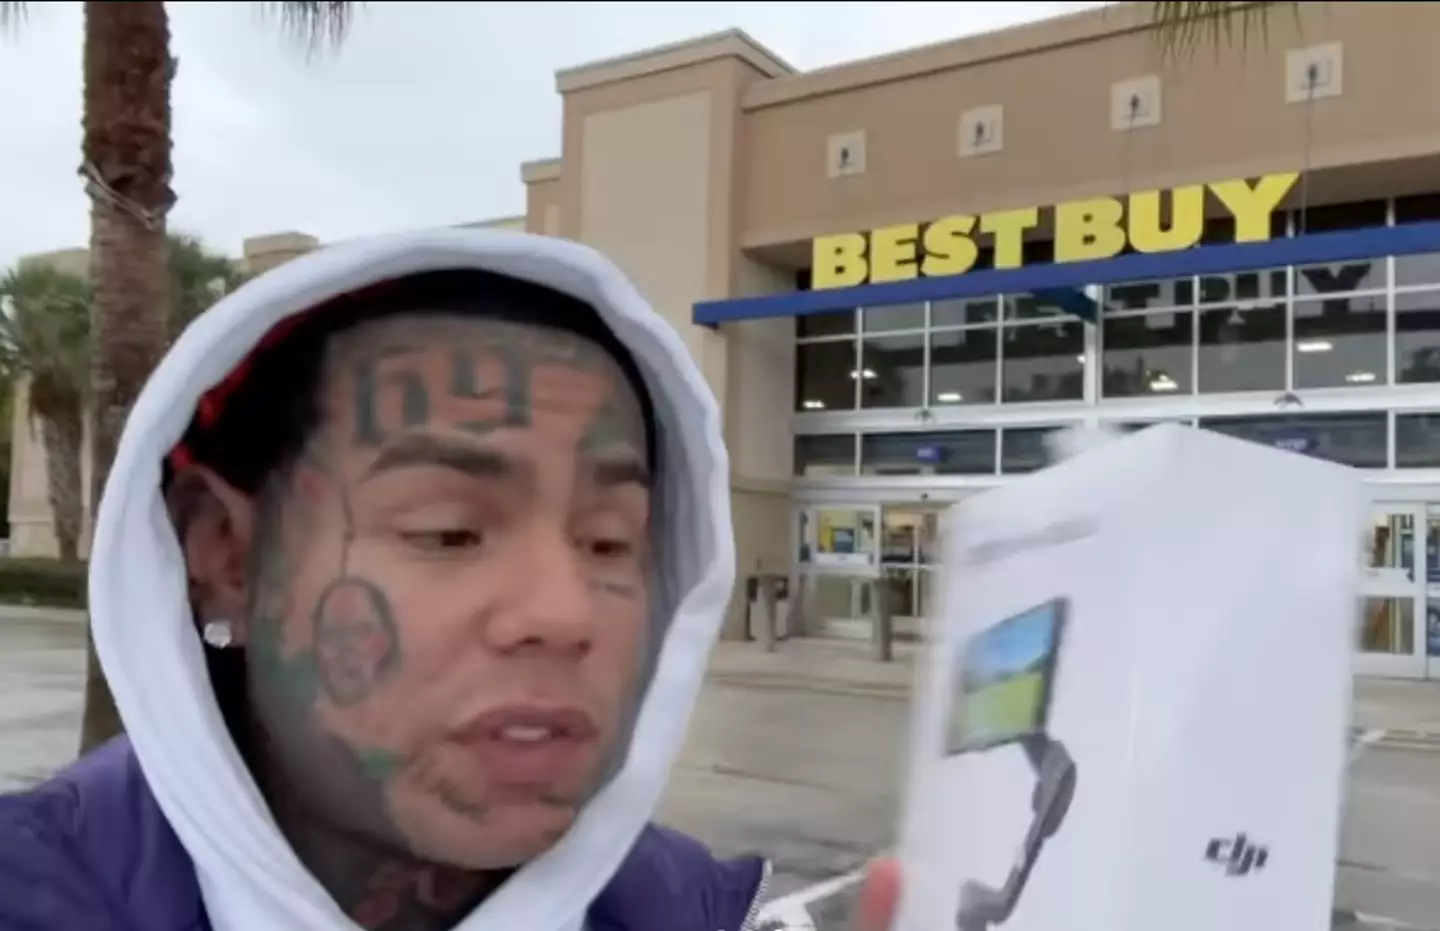 Tekashi recorded the new video by himself.